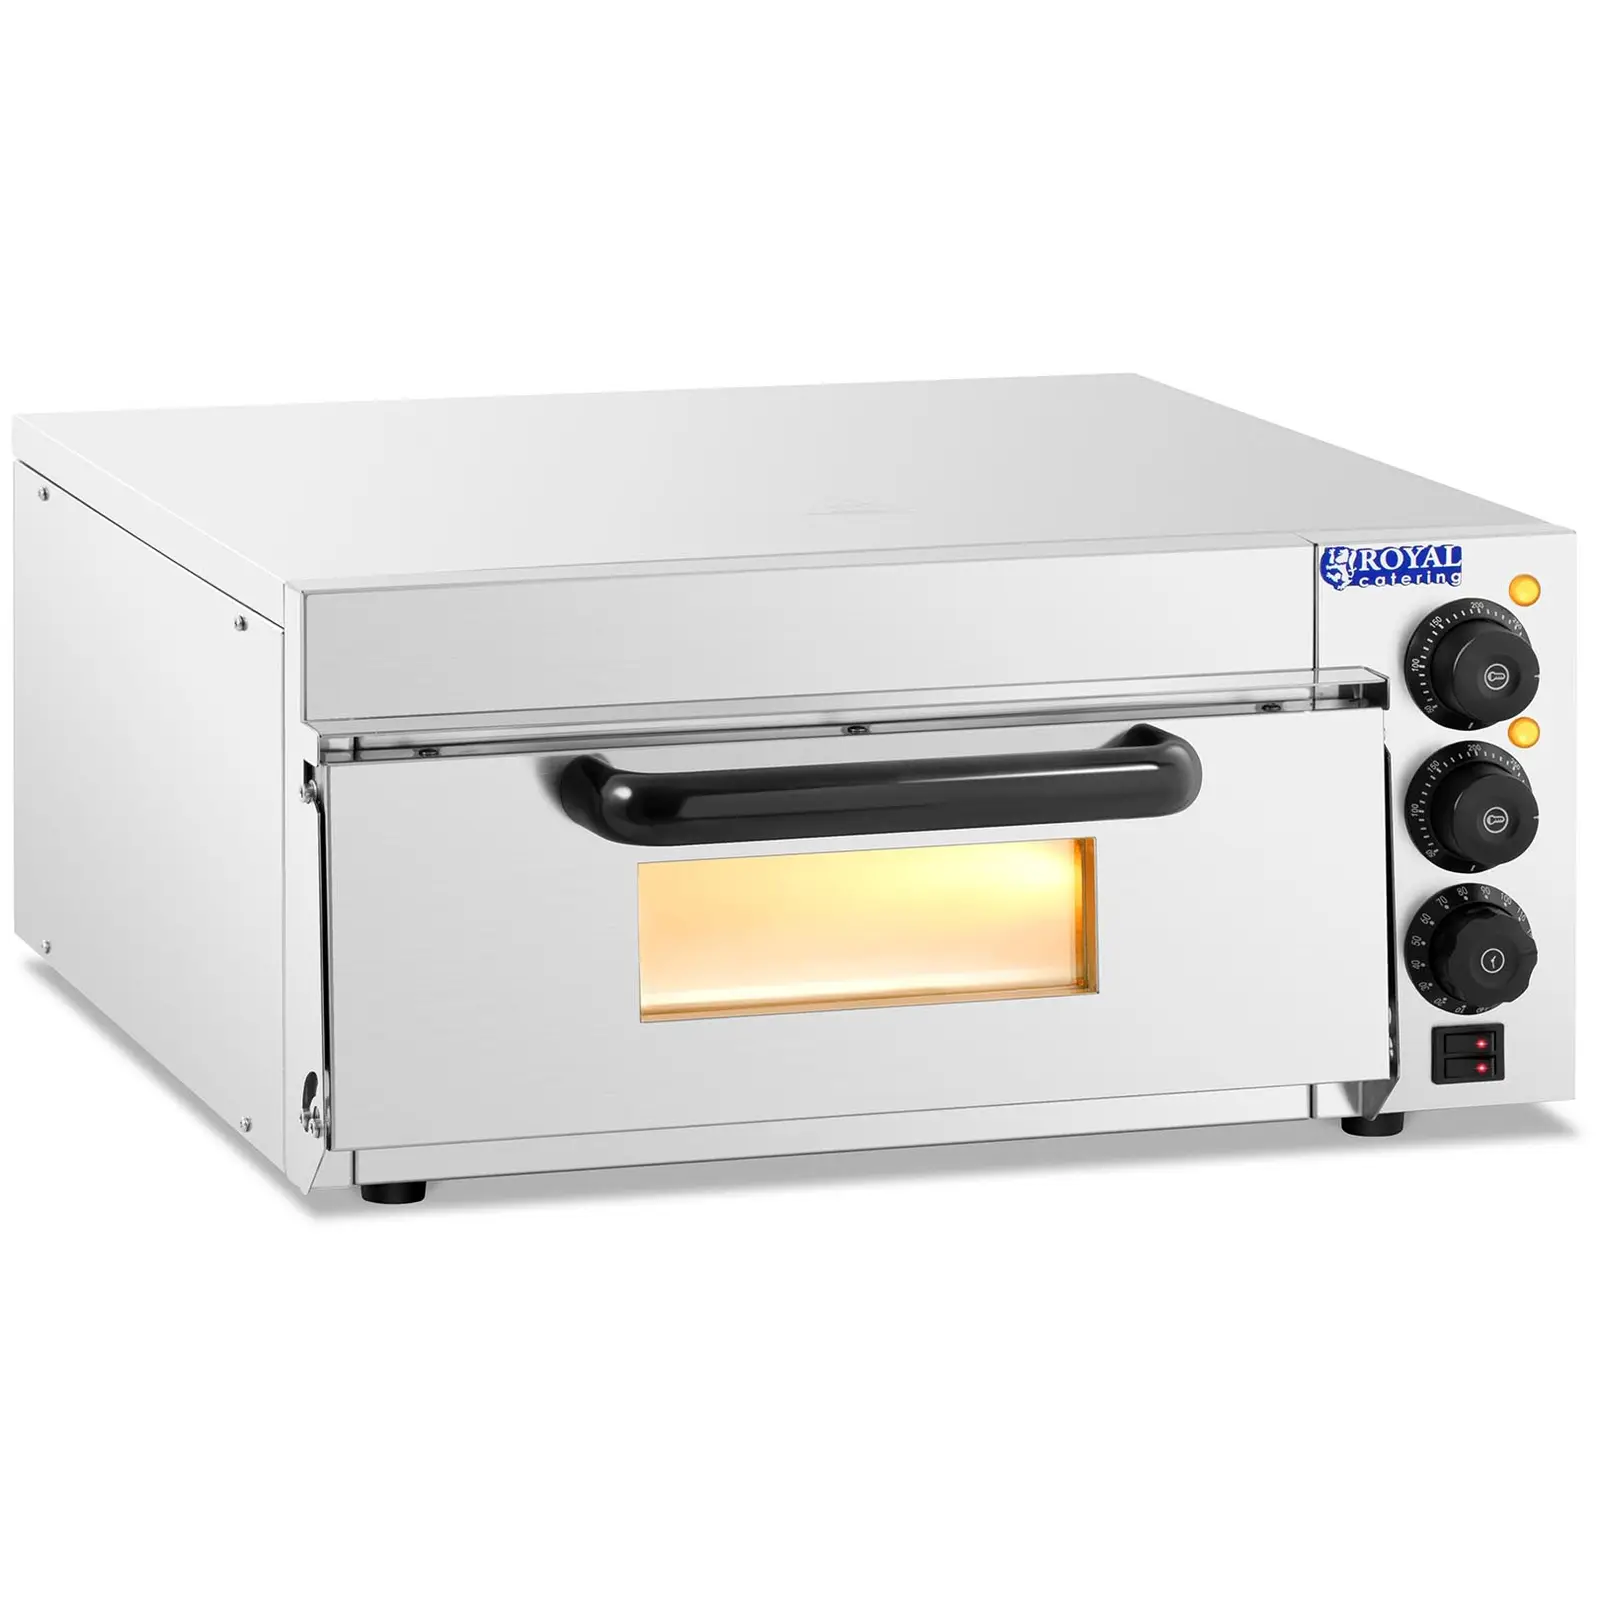 Pizzaugn - 1 kammare - Royal Catering - 2,000 W - Ø 36 cm